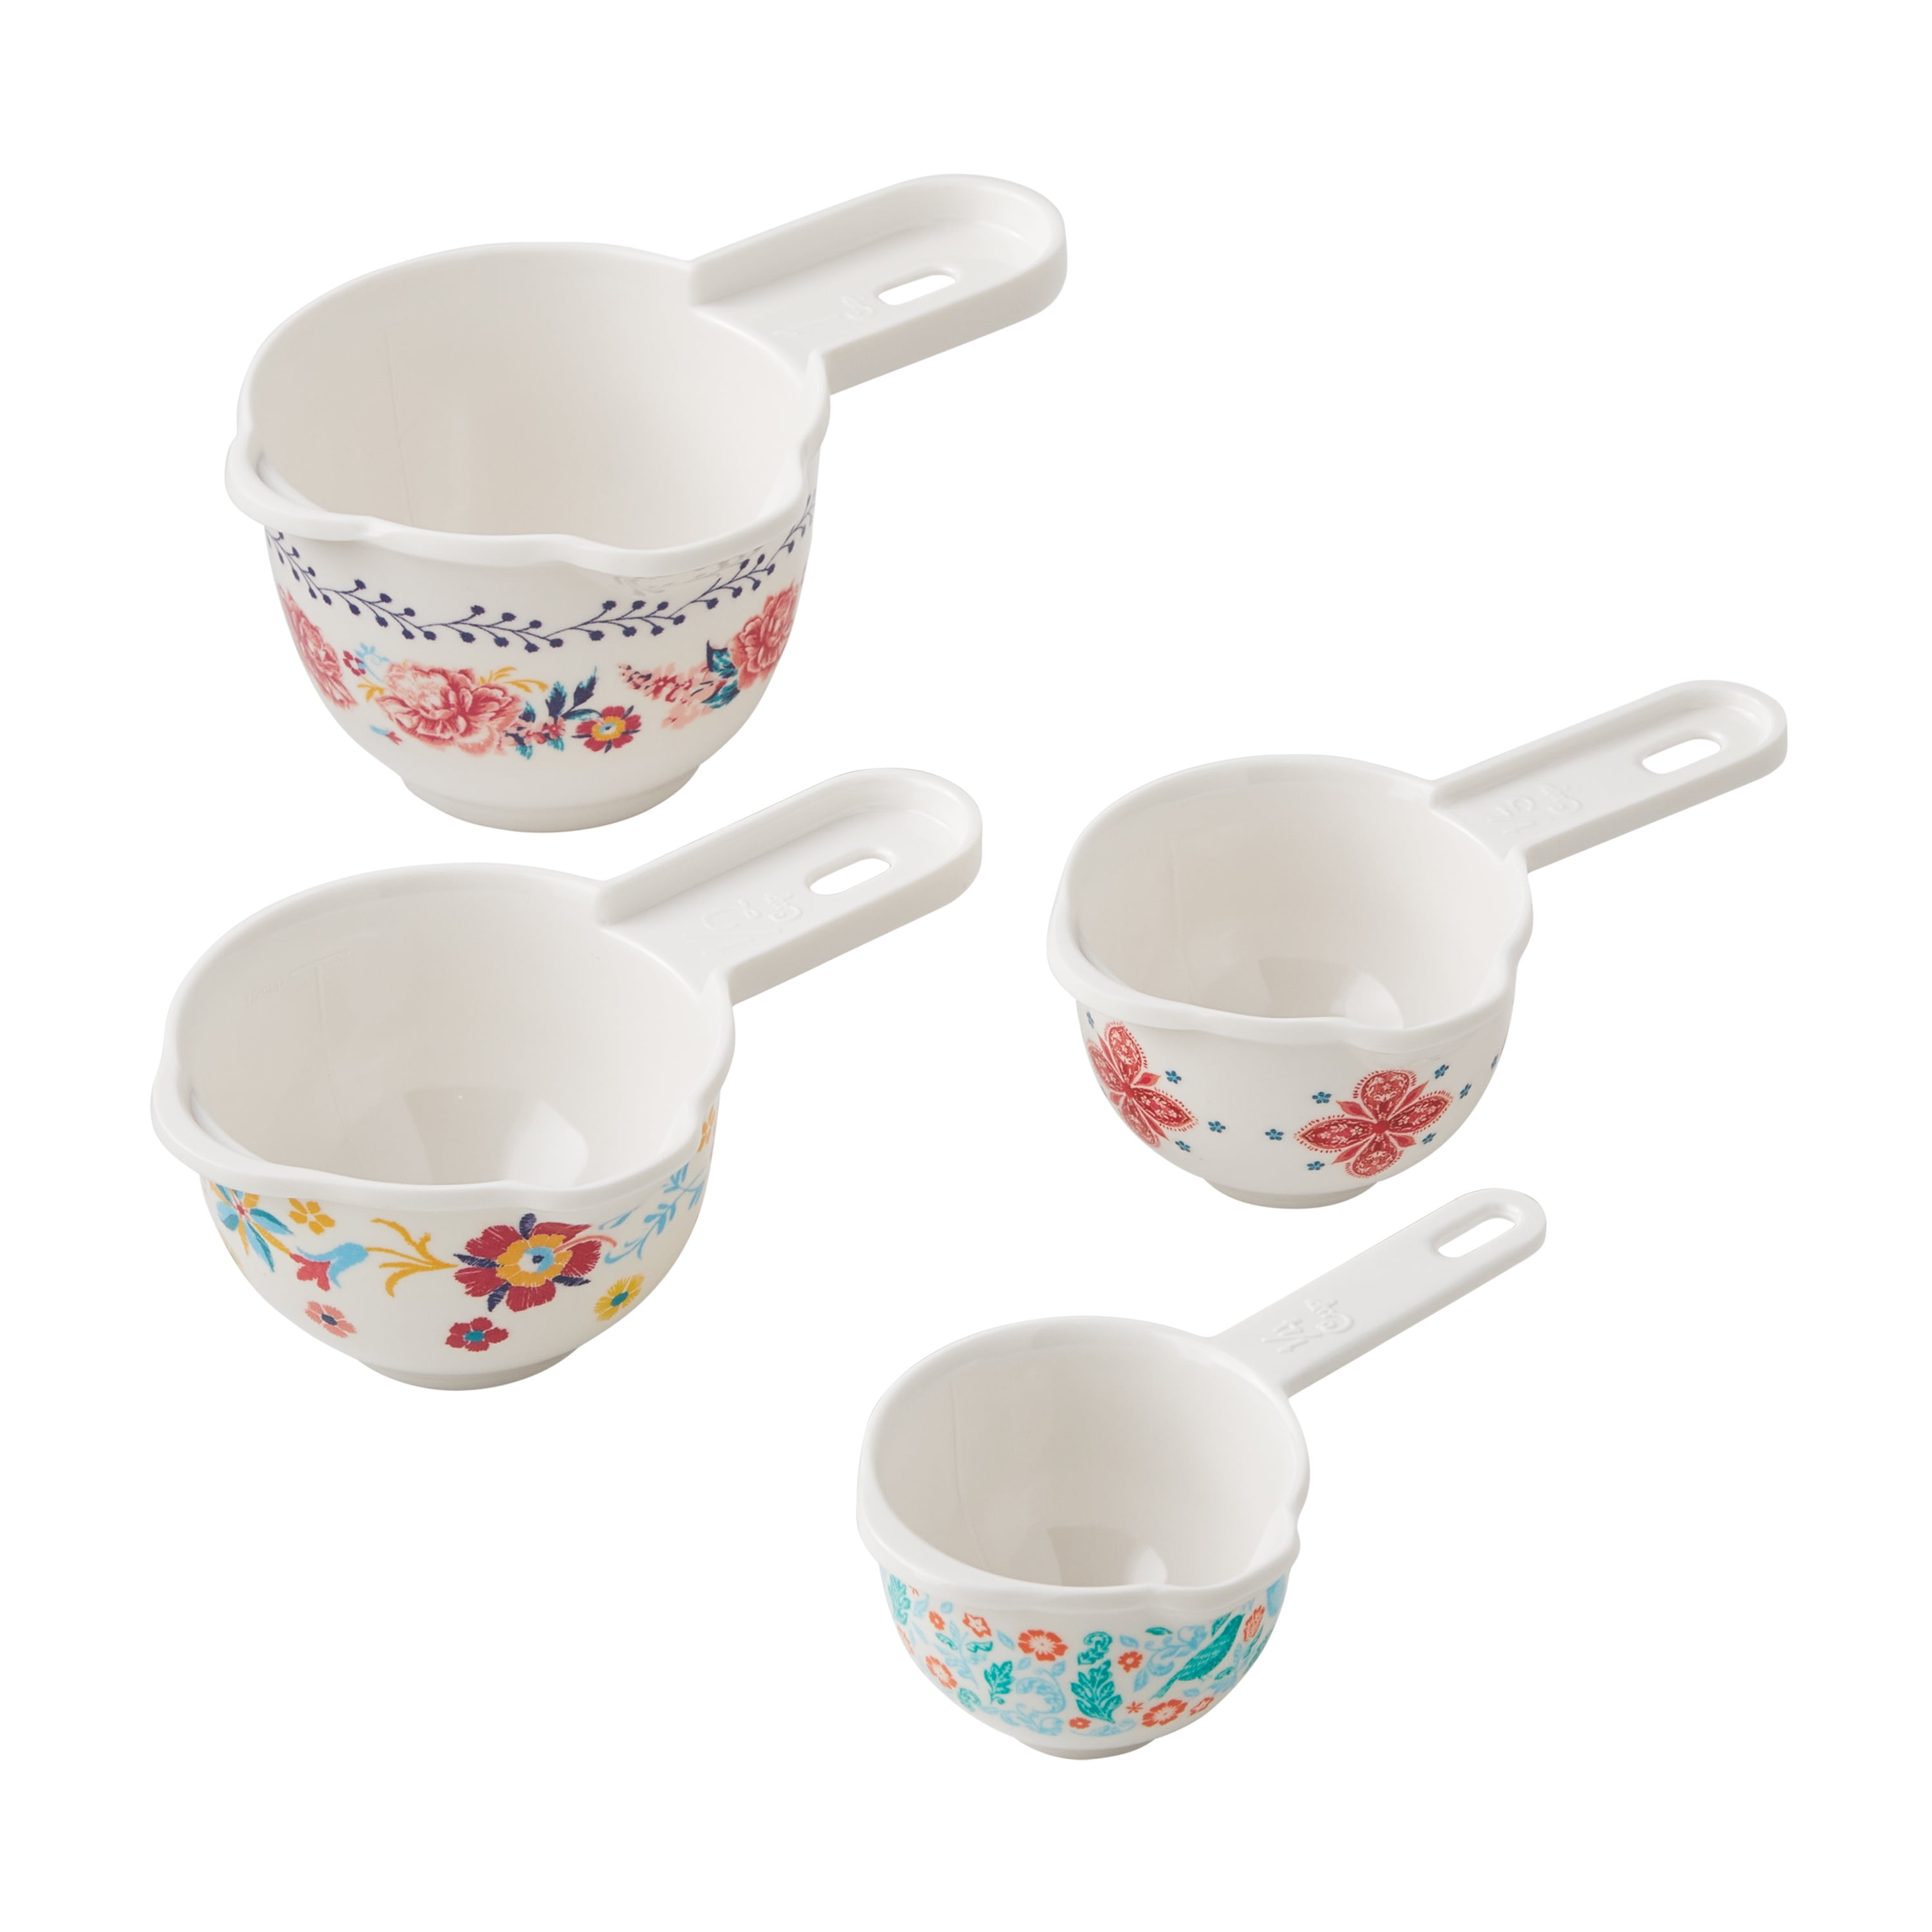 10 Pieces Measuring Cups and Spoons Set – Baking Treasures Bake Shop